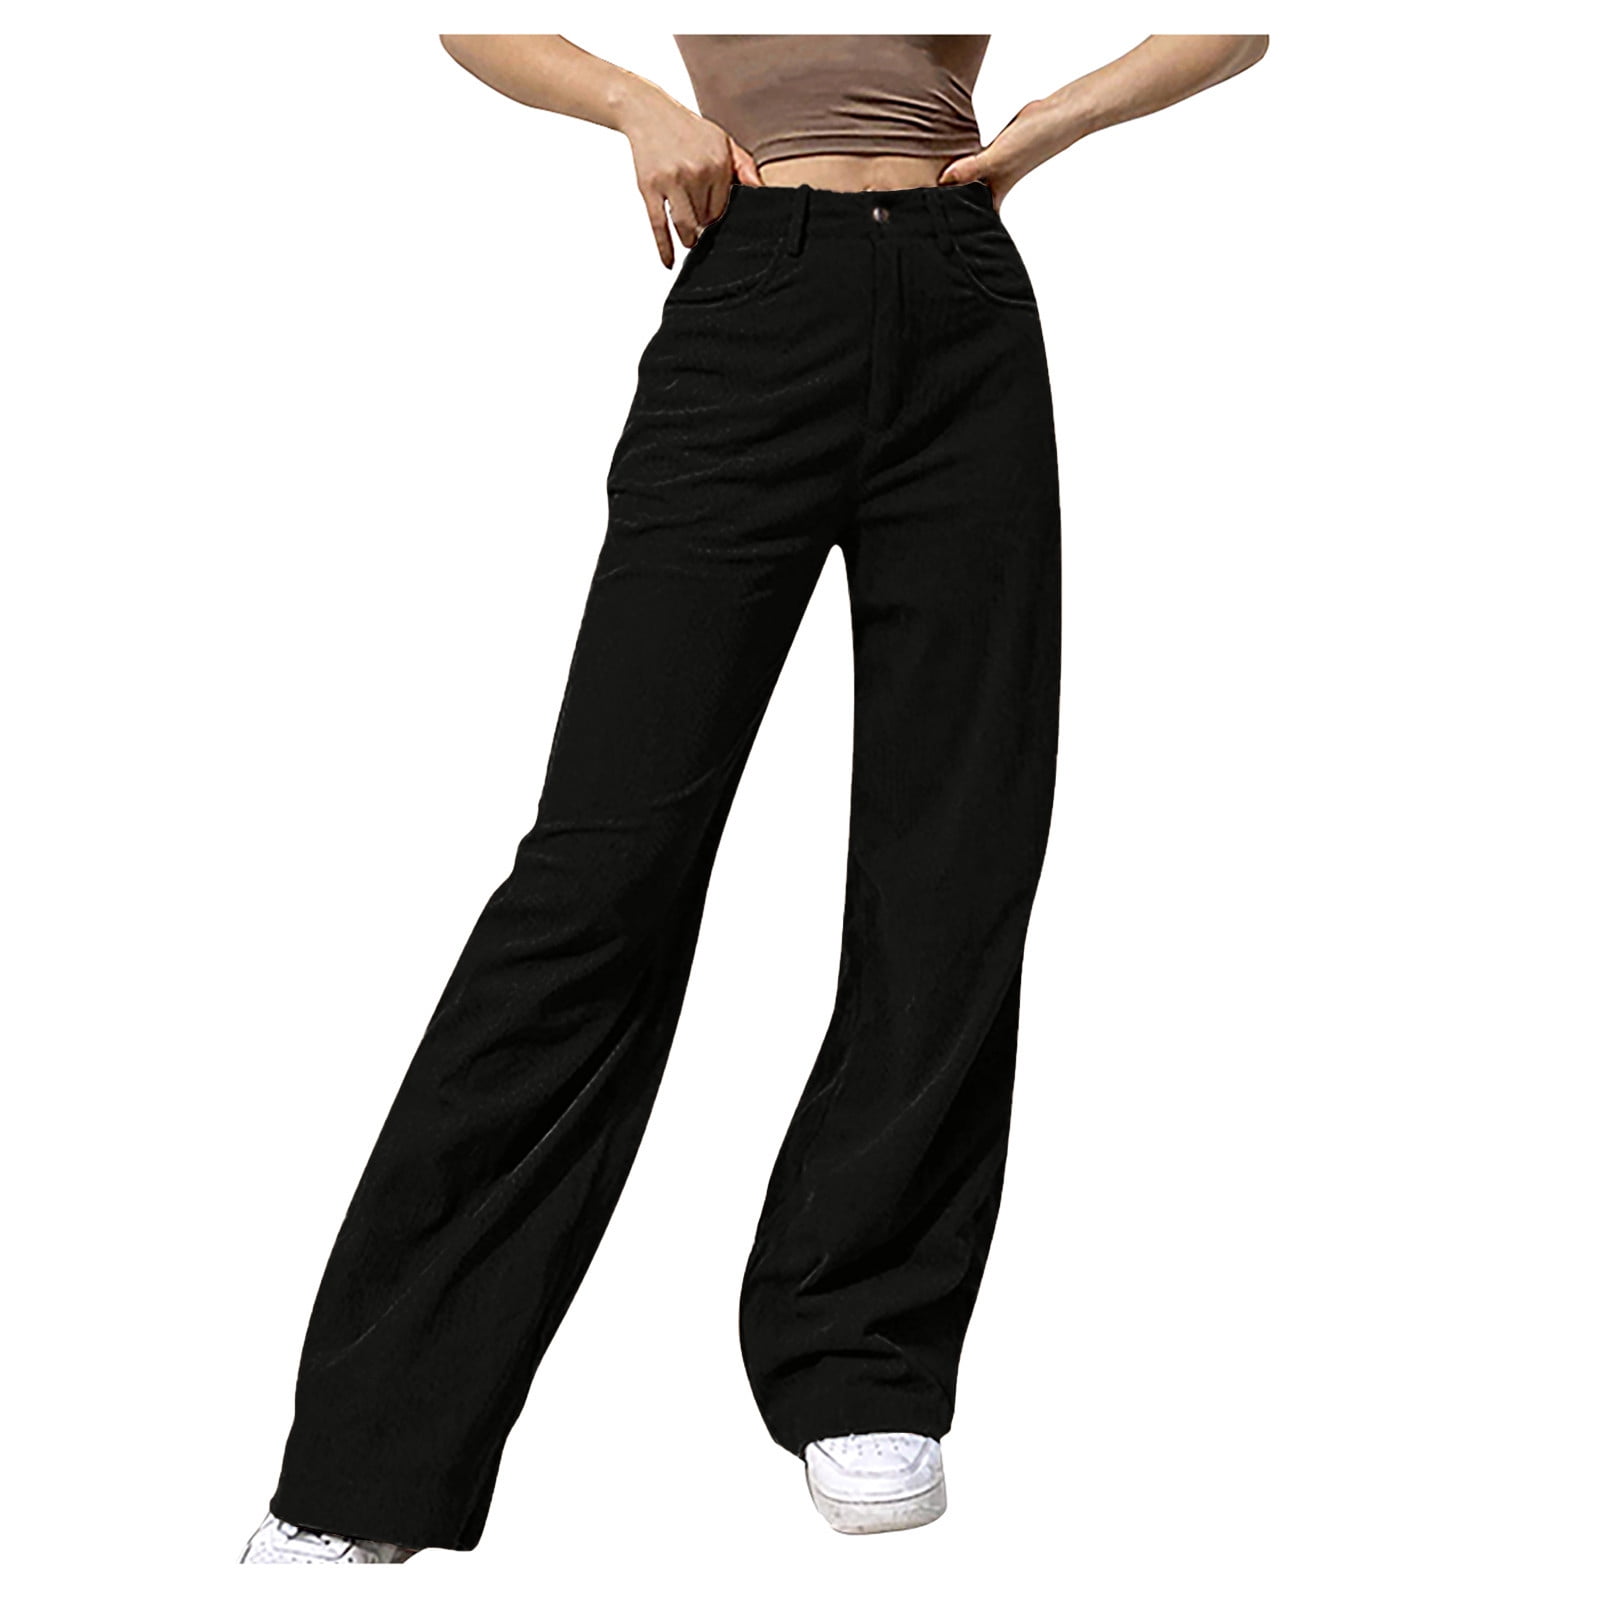 ketyyh-chn99 Pants Women's Casual Loose Paper Bag Waist Long Pants Trousers  with Bow Tie Belt Pockets 